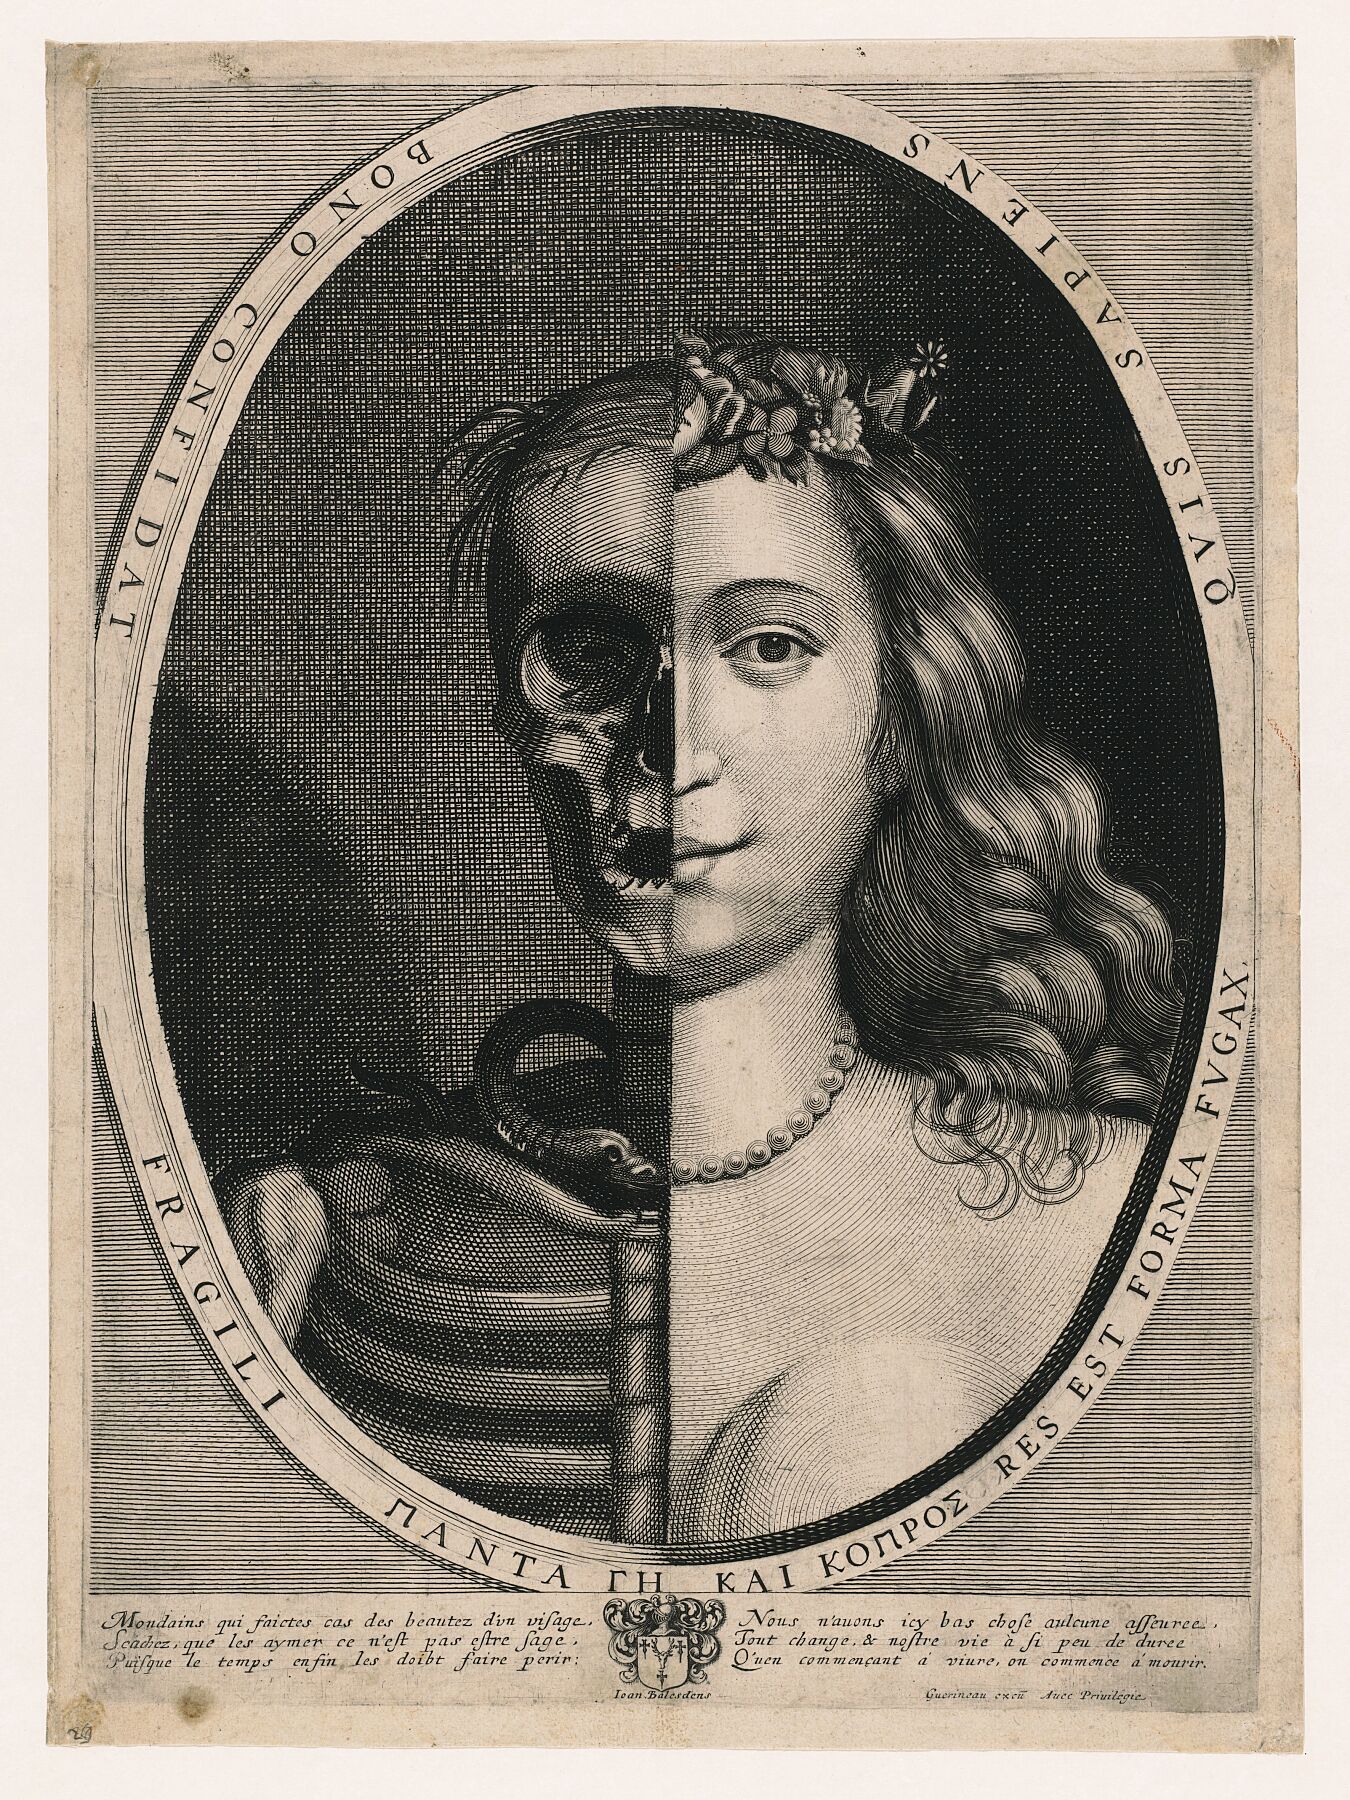 Bust of Half a Skeleton and Half a Young Woman, anonymous - c. 1615-1664